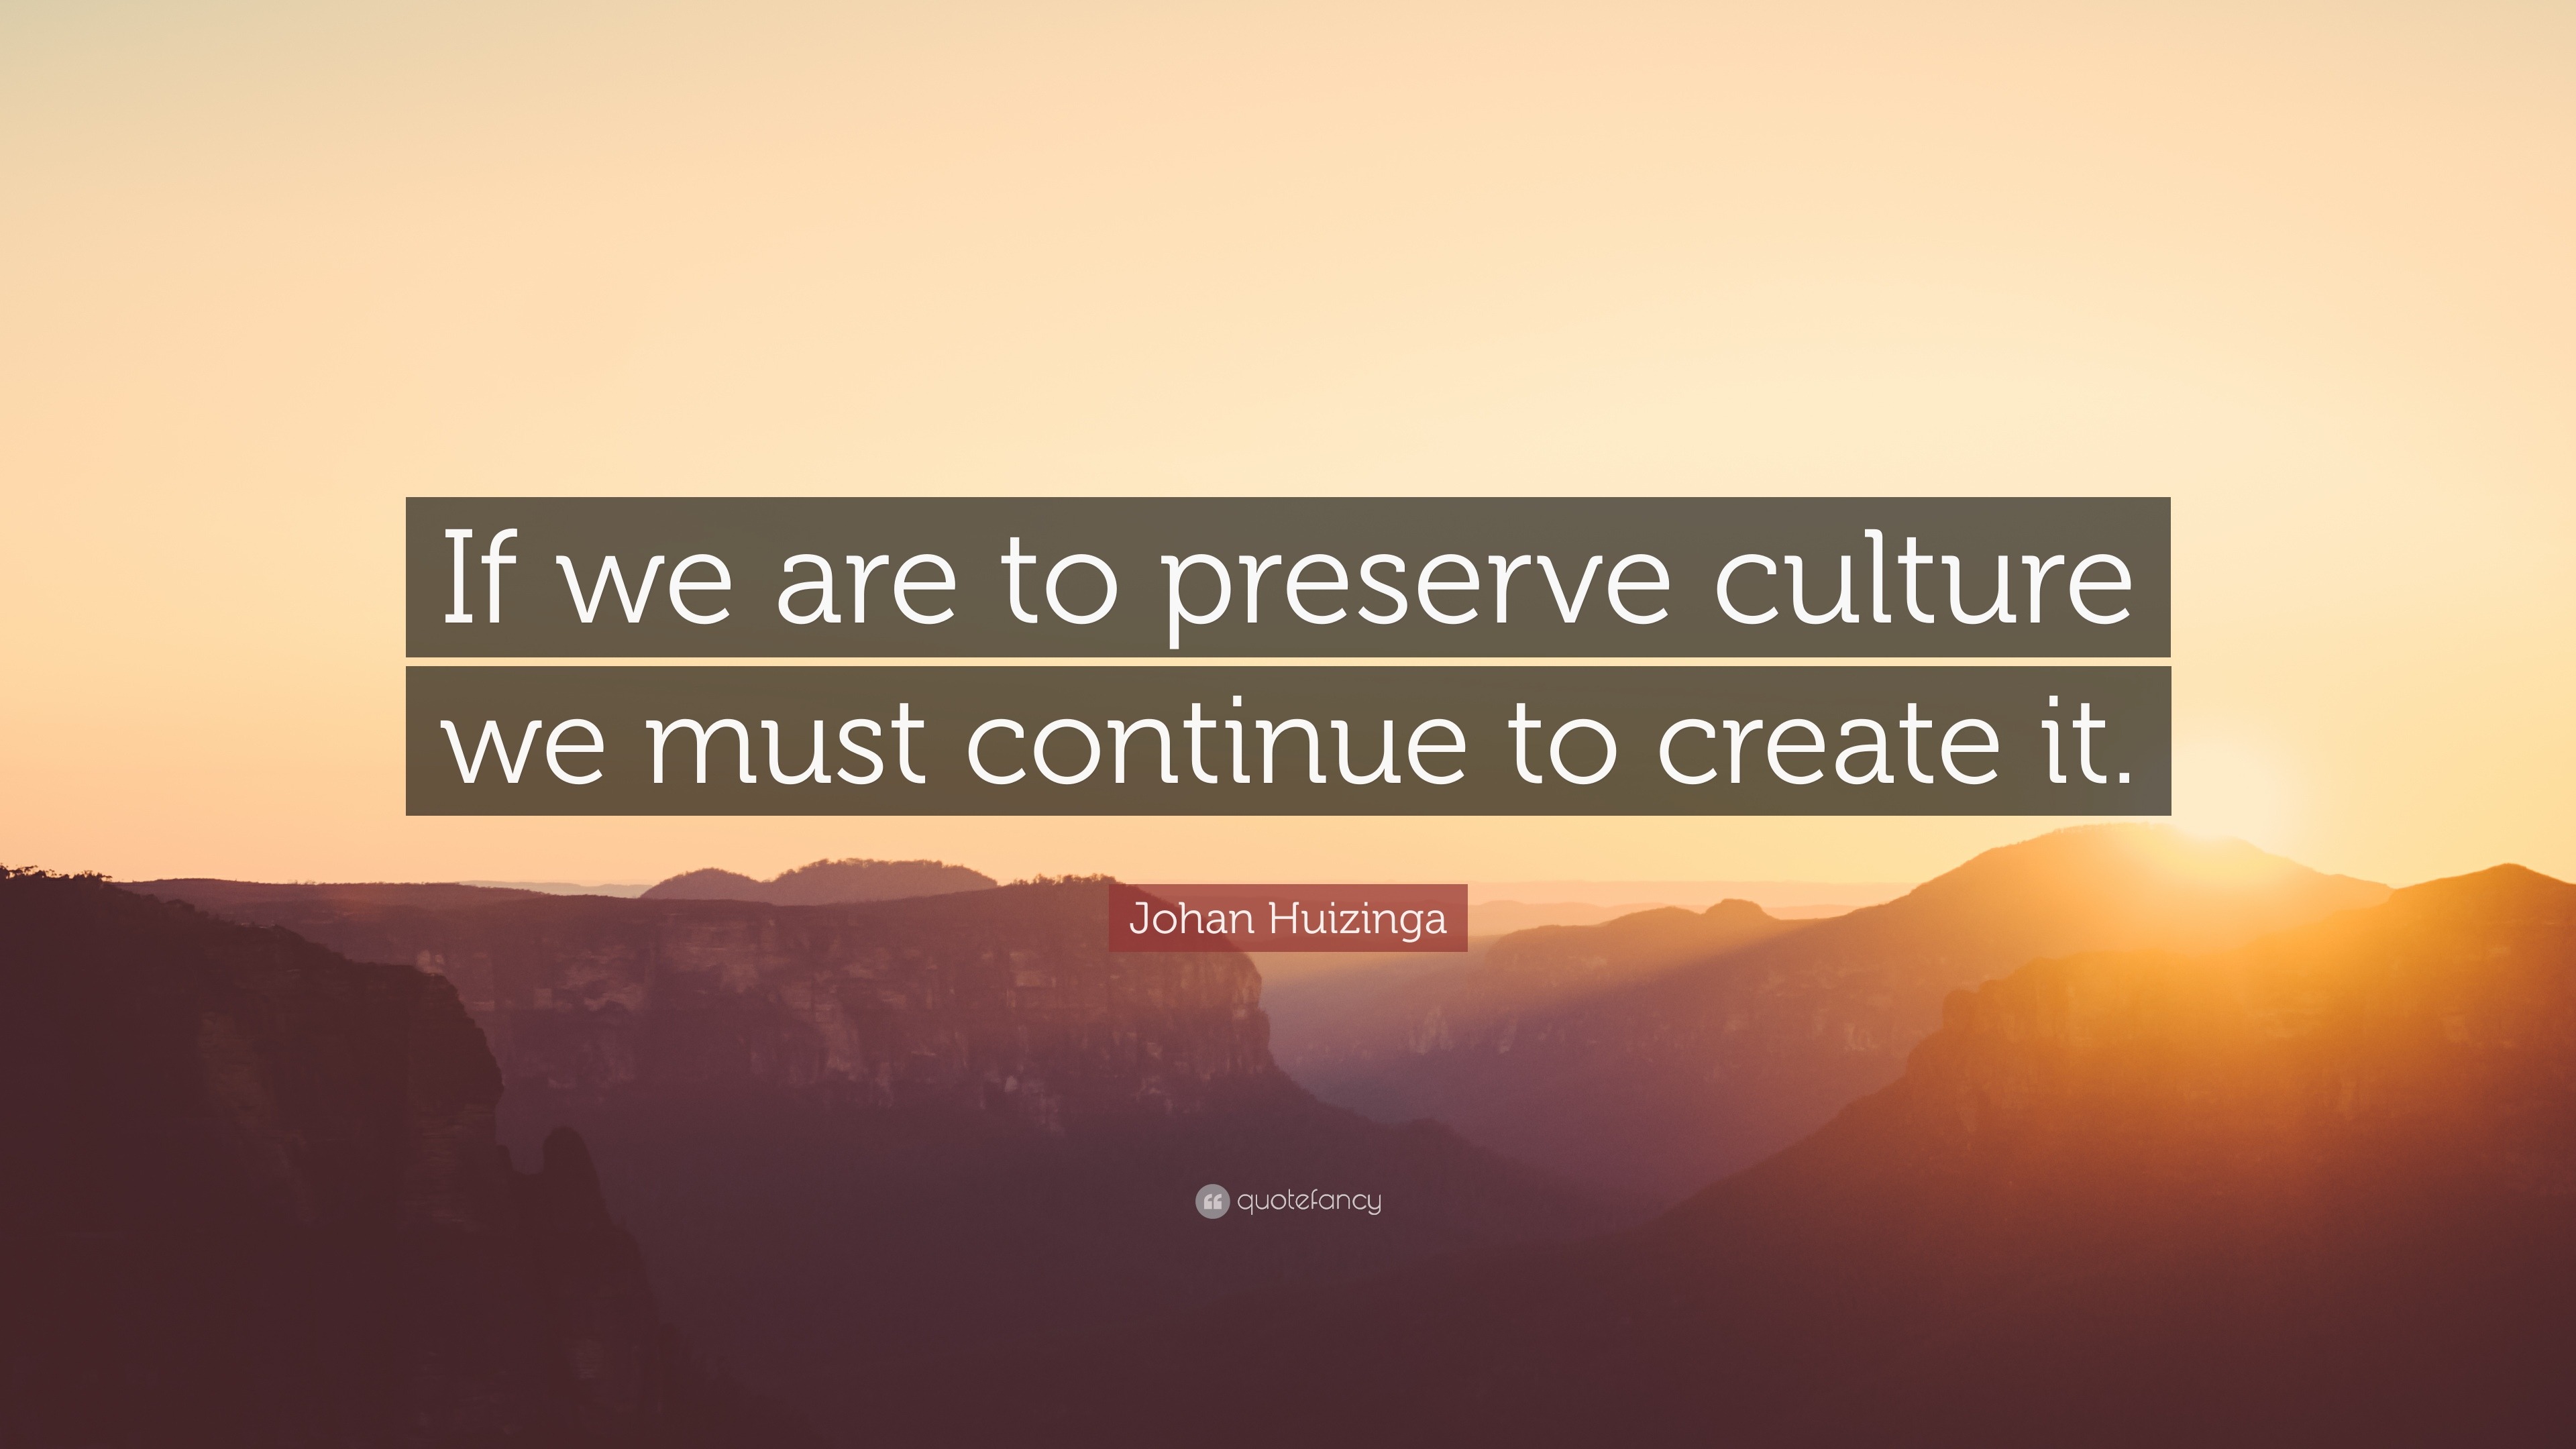 essay about preserving culture